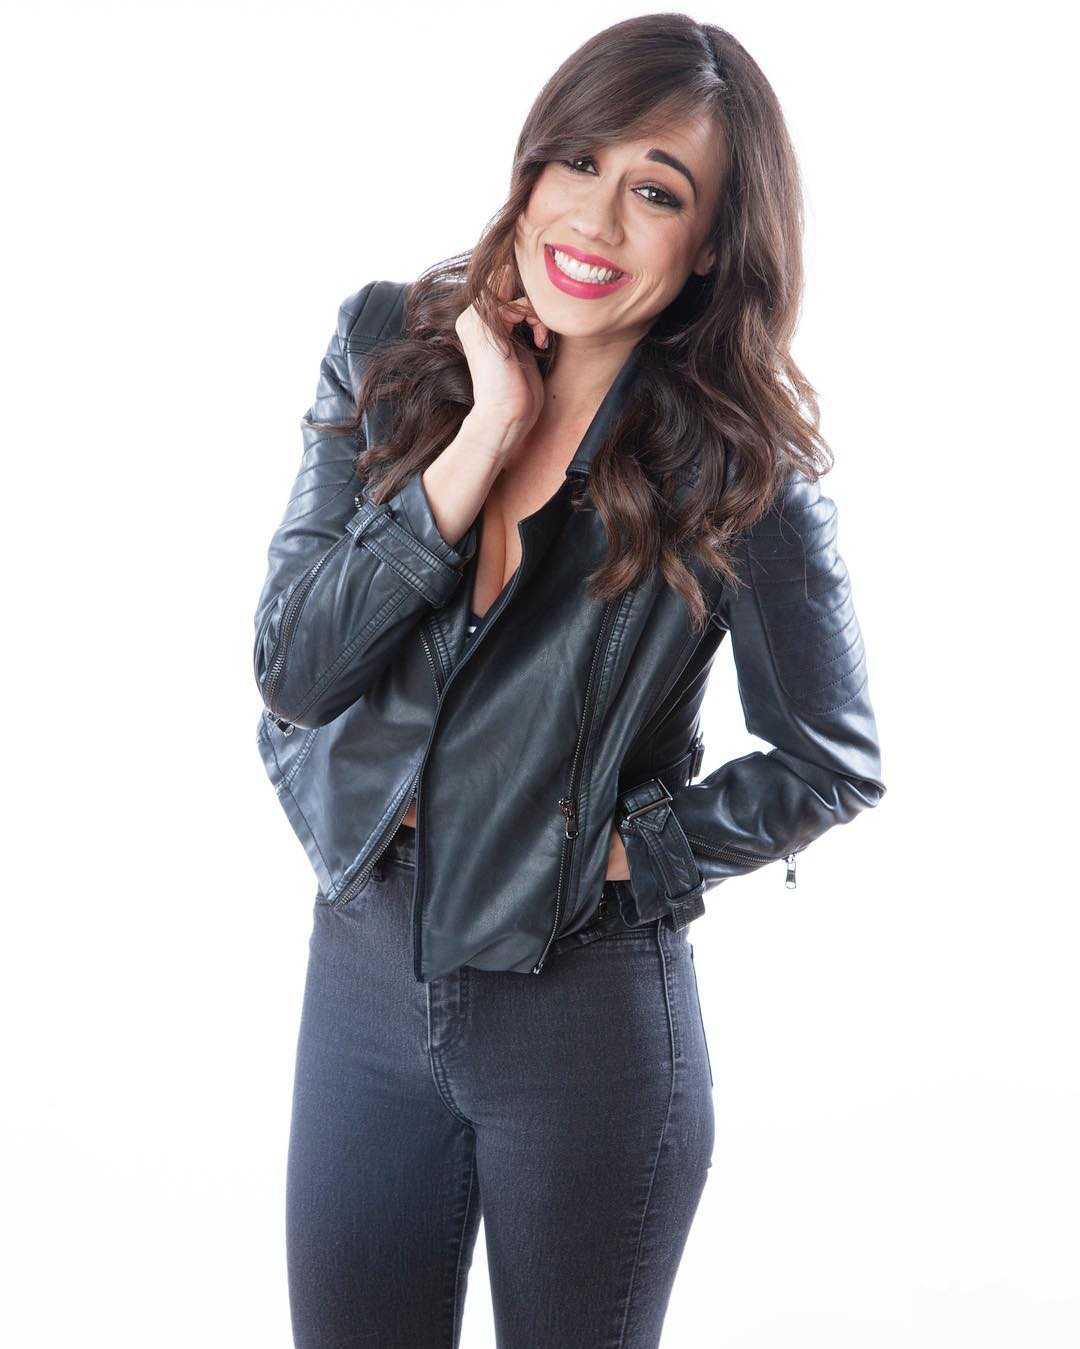 51 Hottest Colleen Ballinger Big Butt Pictures That Will Make You Begin To Look All Starry Eyed At Her 35